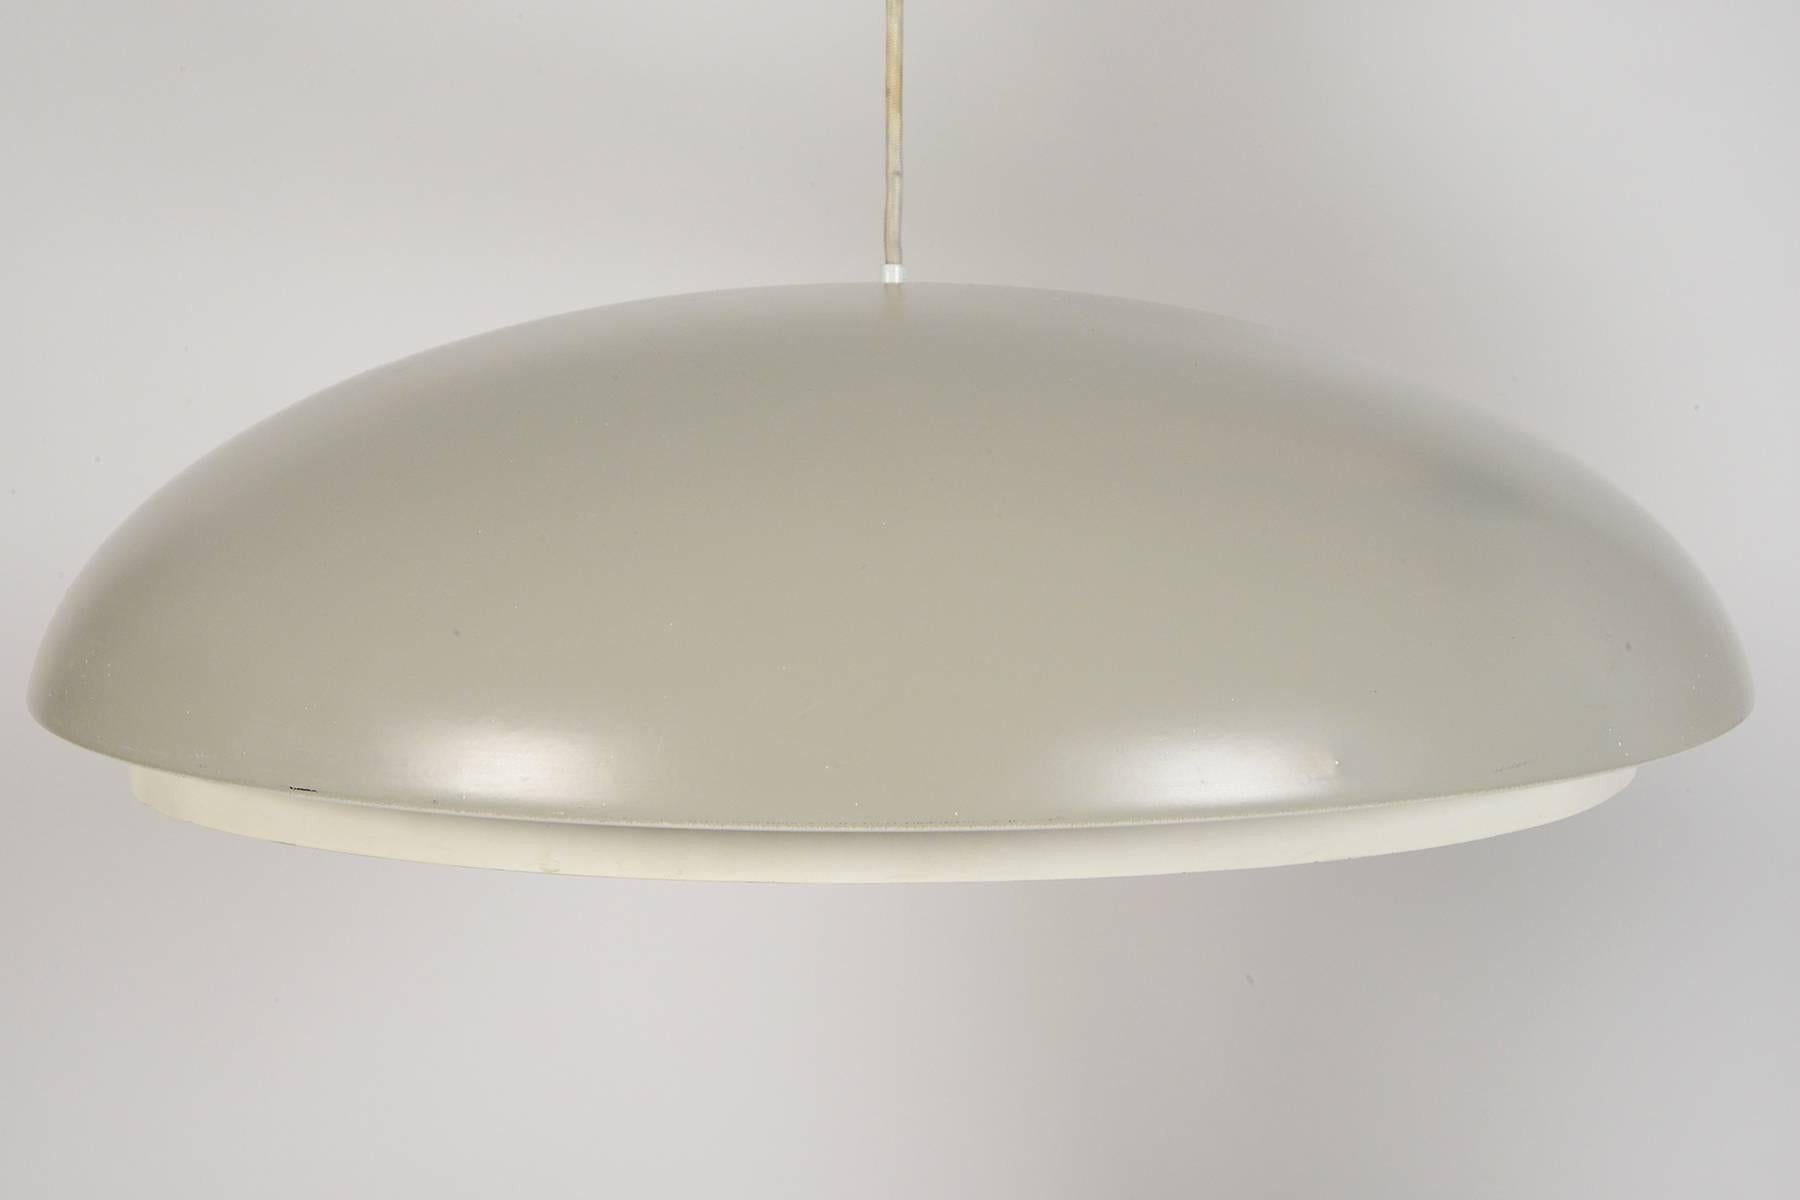 Designed in 1967 by Vilhelm Wohlert & Jørgen Bo for Louis Poulsen, this large pendant offers three interior sockets and a diffusing ring for a bright, warm glow. The original grey lacquered dome of this California pendant is perfect for any room in